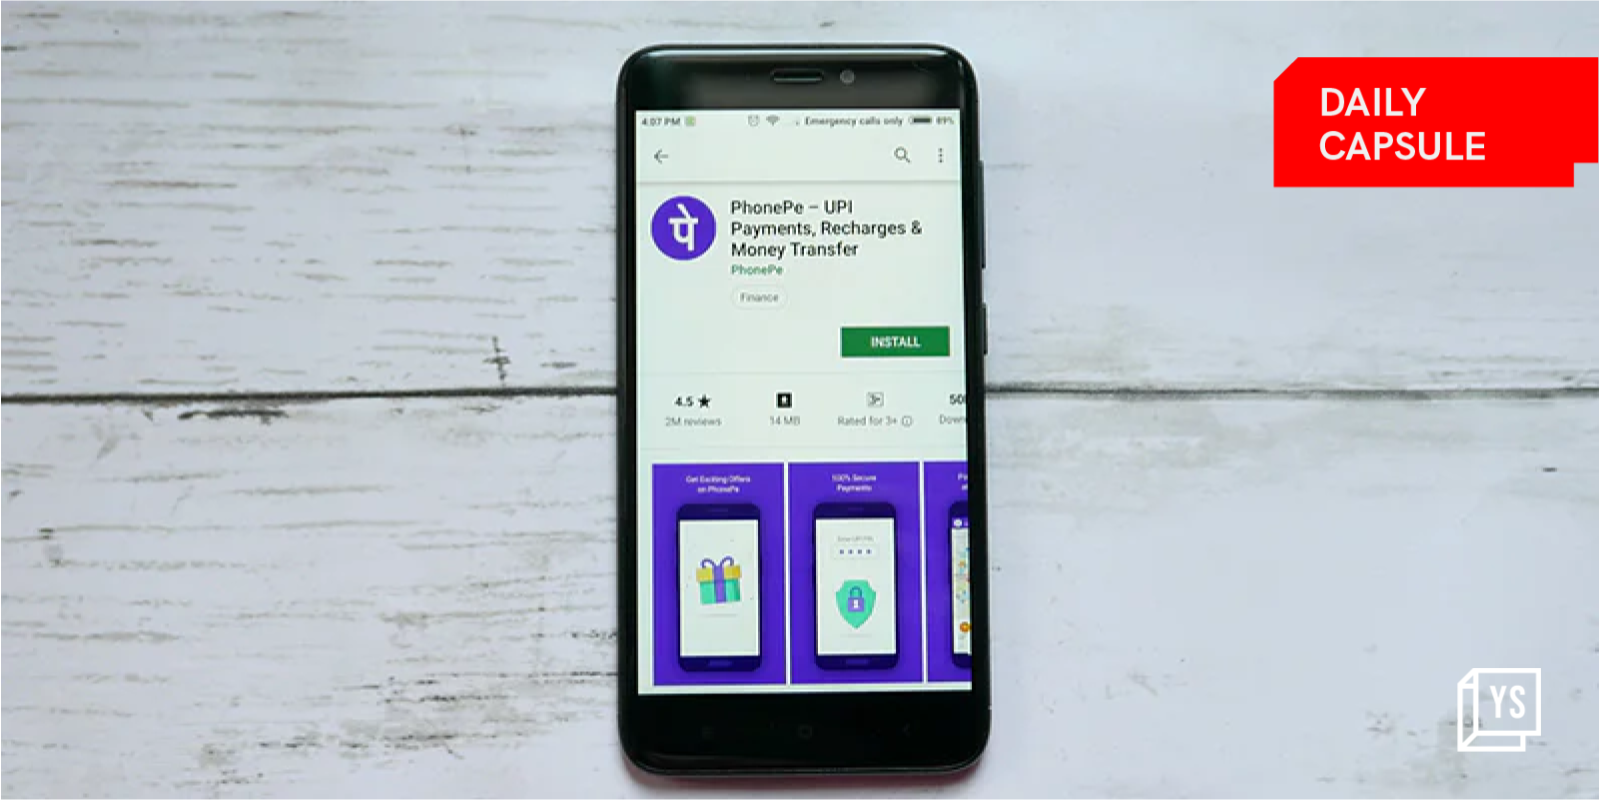 PhonePe receives over Rs 740 Cr from parent